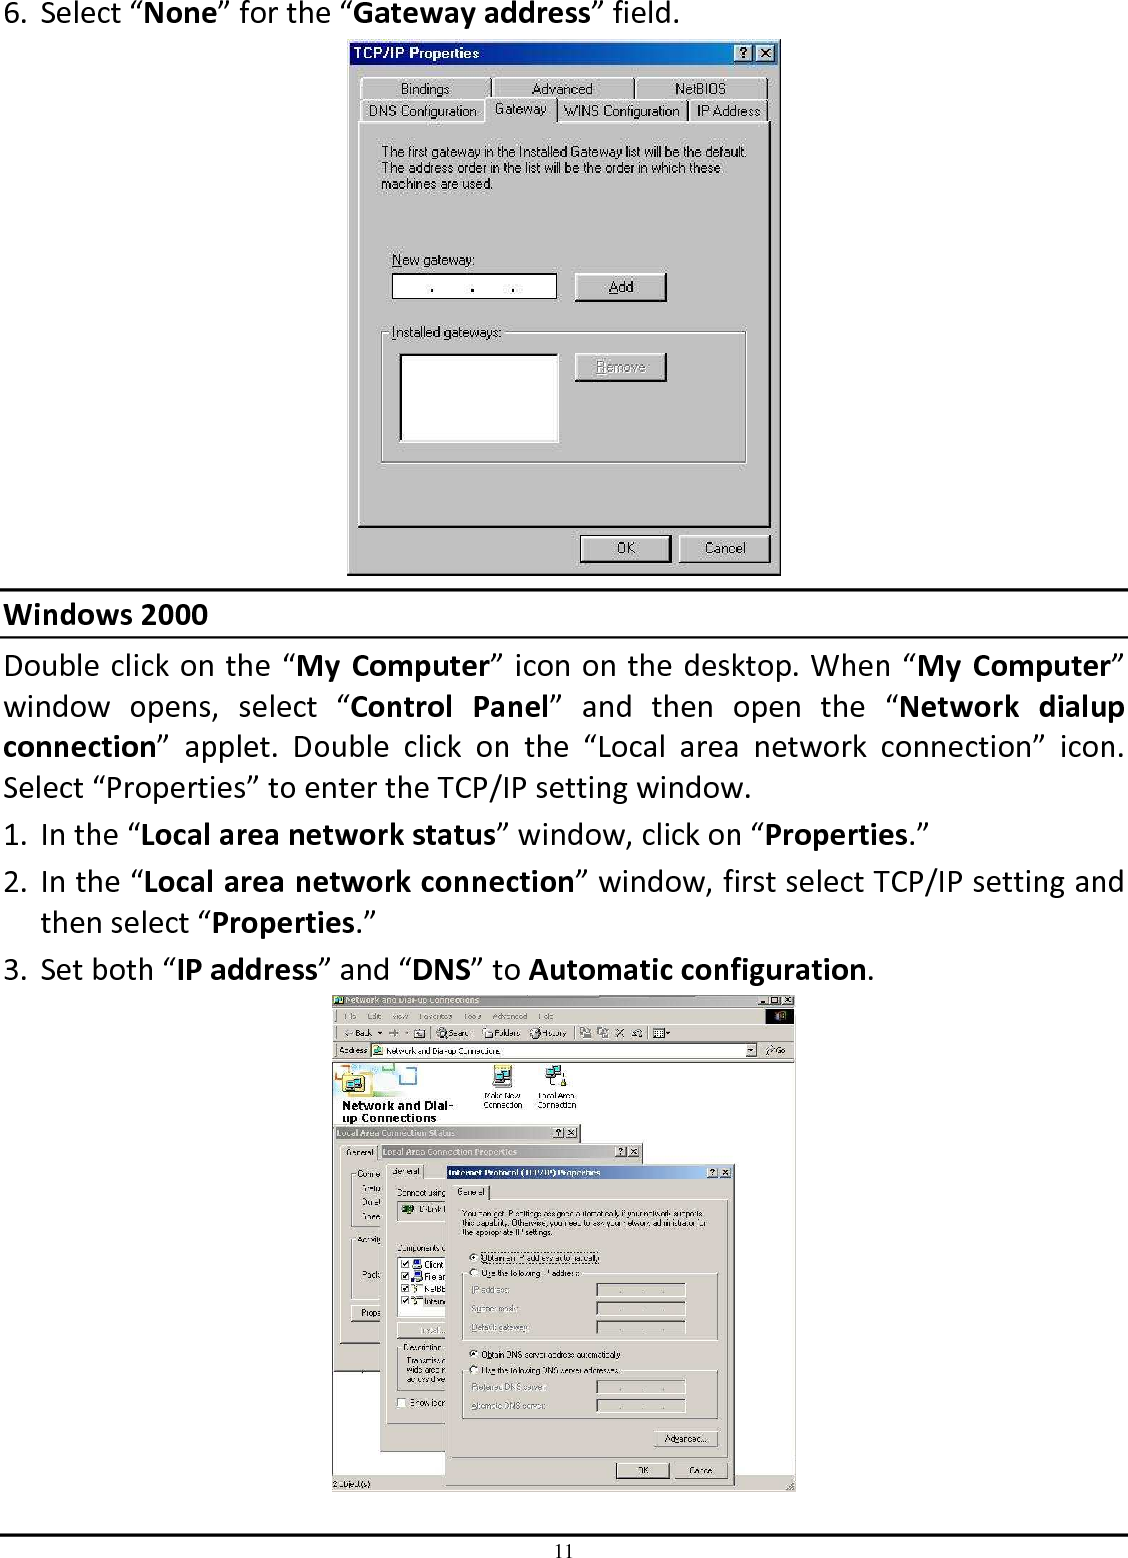 11 6. Select “None” for the “Gateway address” field.  Windows 2000 Double click on the “My  Computer” icon on the desktop. When “My  Computer” window  opens,  select  “Control  Panel”  and  then  open  the  “Network  dialup connection”  applet.  Double  click  on  the  “Local  area  network  connection”  icon. Select “Properties” to enter the TCP/IP setting window. 1. In the “Local area network status” window, click on “Properties.” 2. In the “Local area network connection” window, first select TCP/IP setting and then select “Properties.” 3. Set both “IP address” and “DNS” to Automatic configuration.  